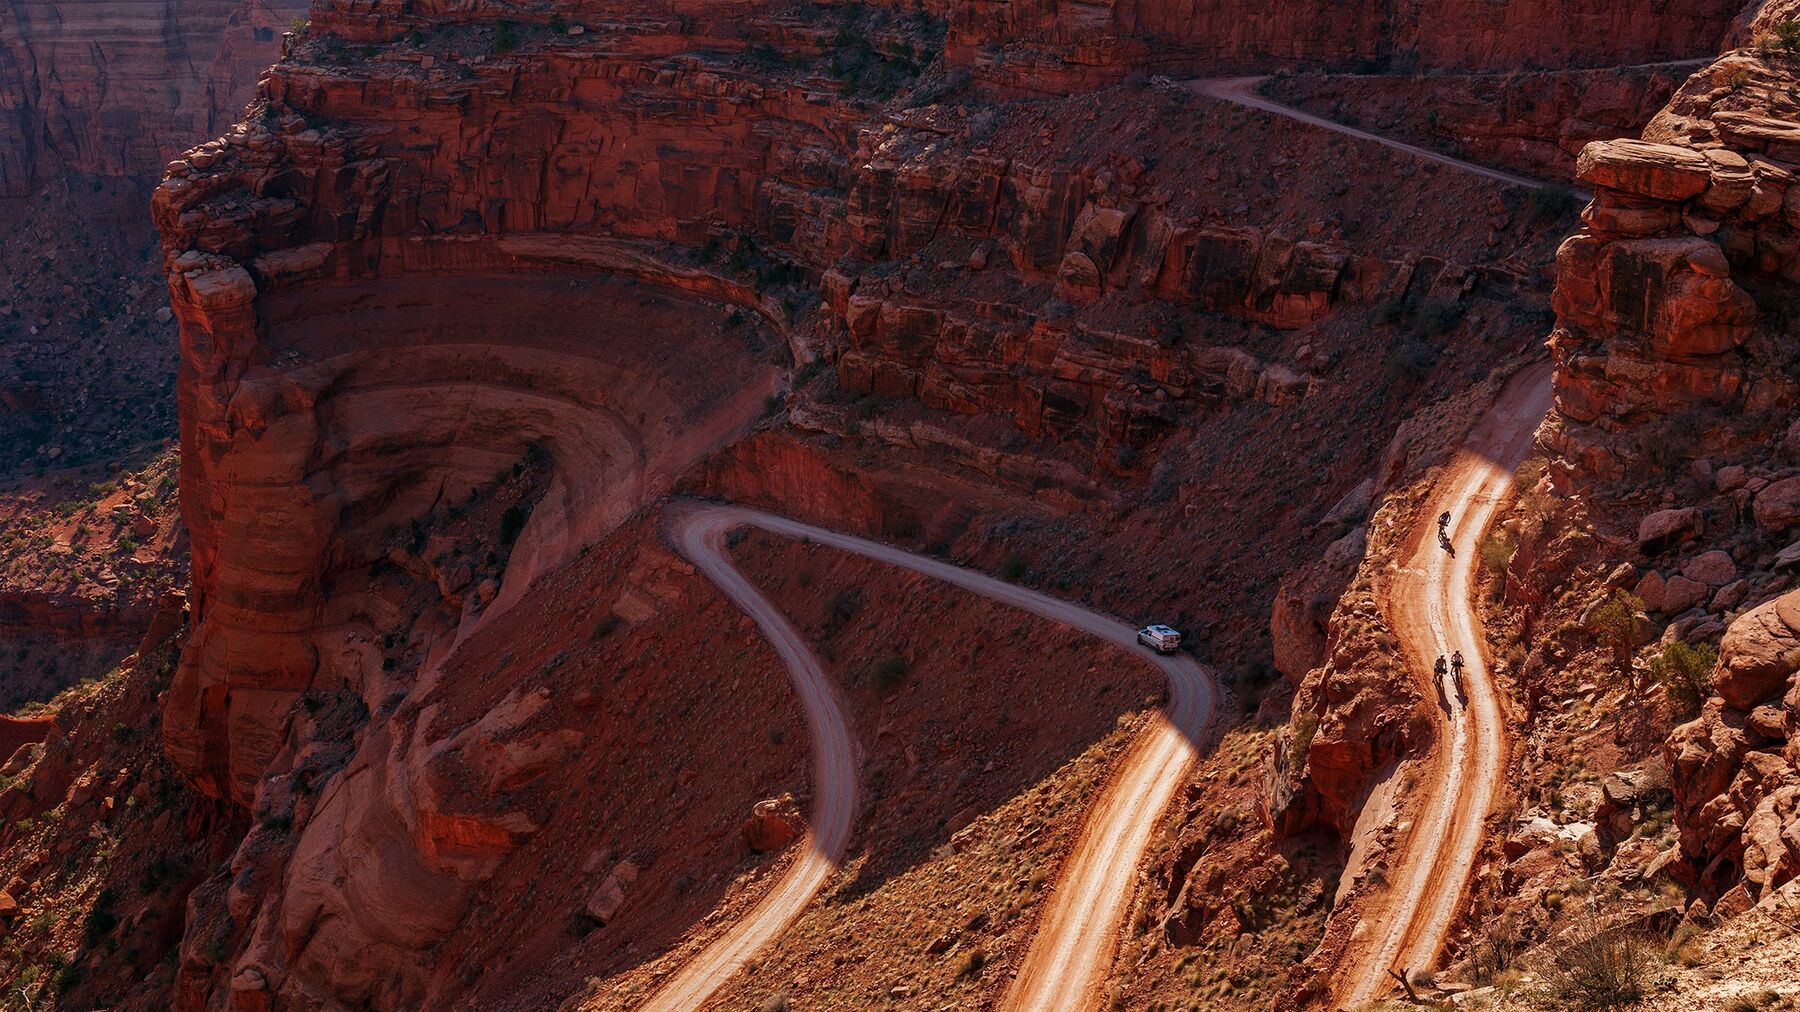 A landscape-oriented color photograph taken from a high vantage point showing a winding dirt road descending a red sandstone canyon in the desert. The road starts in the top right and zig-zags toward the bottom left. Three cyclists can be seen near the top of the road, and a truck is half-way down. The warm desert sun is illuminating the lower-right diagonal.